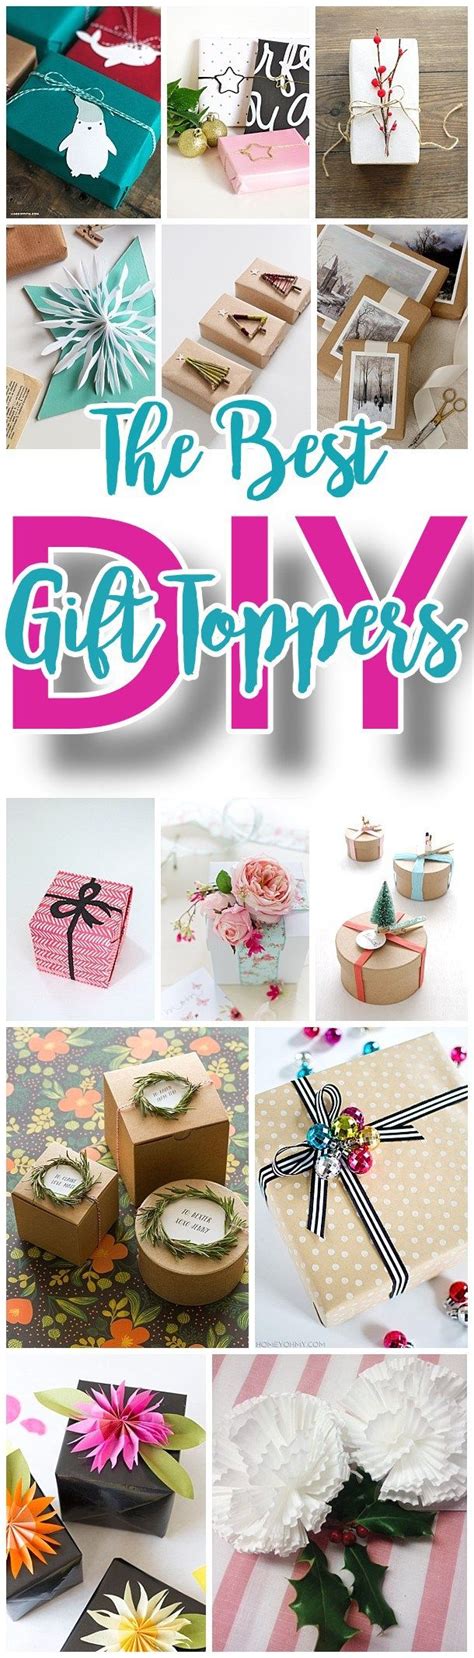 The Best Diy T Toppers Pretty Handmade Easy Cheap And Fun T